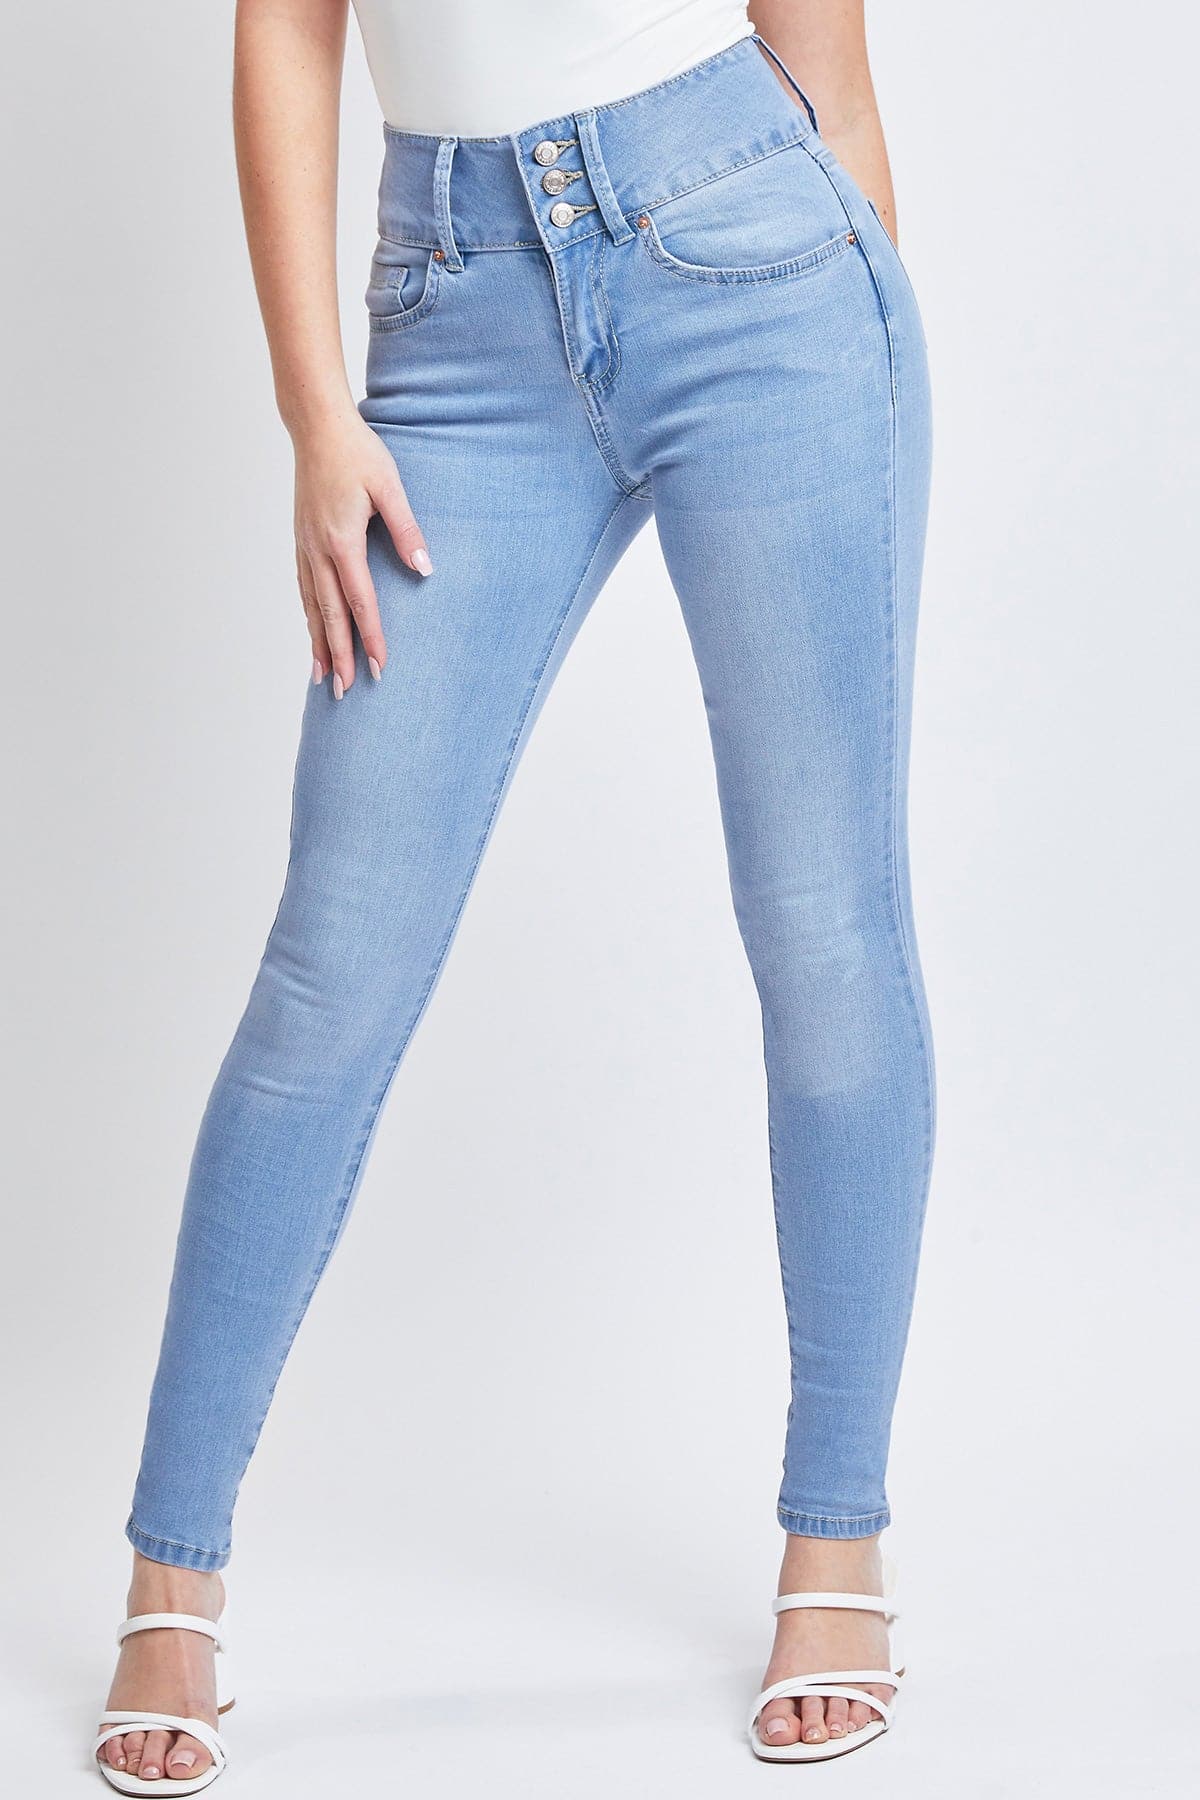 Women's Essential 3 Button Skinny Jeans